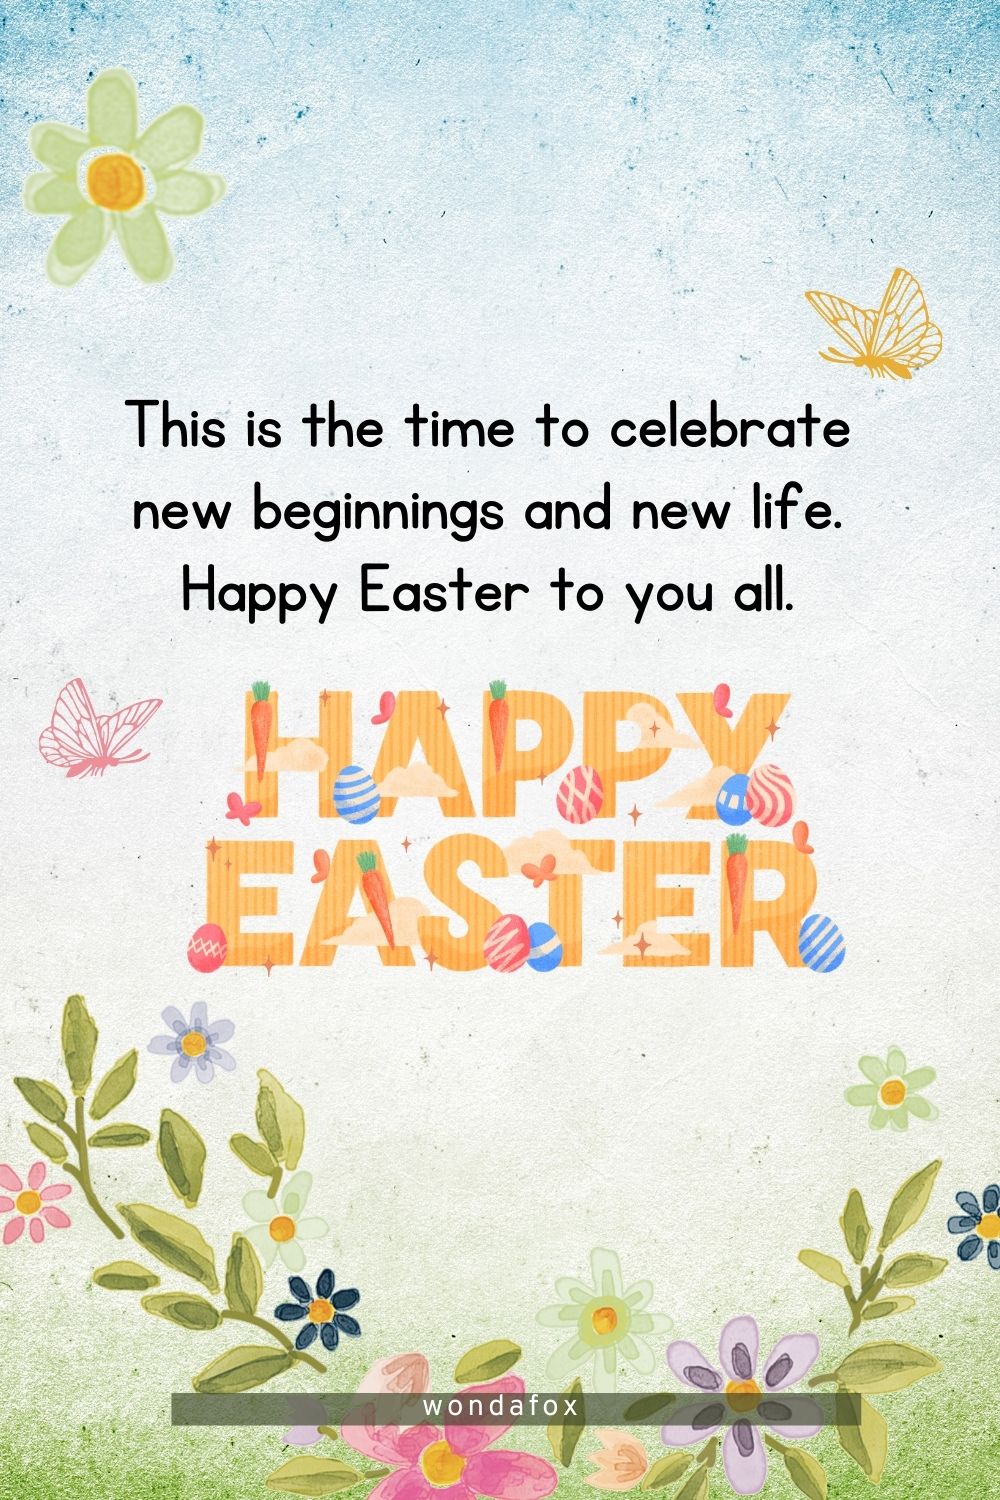 This is the time to celebrate new beginnings and new life. Happy Easter to you all.